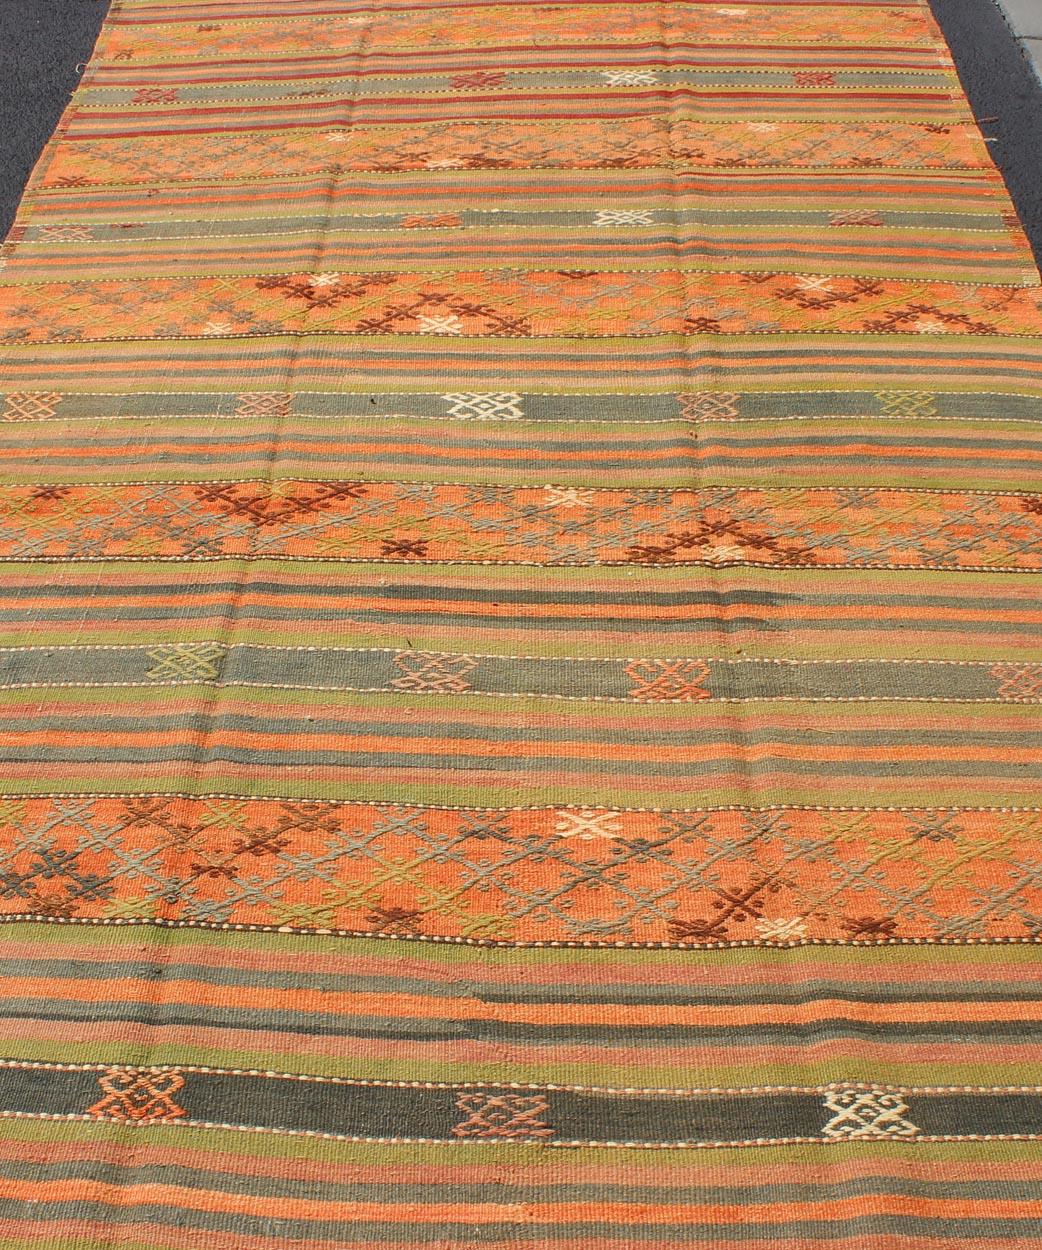 Vintage Turkish Kilim Rug with Geometric Shapes and Colorful Stripes For Sale 4